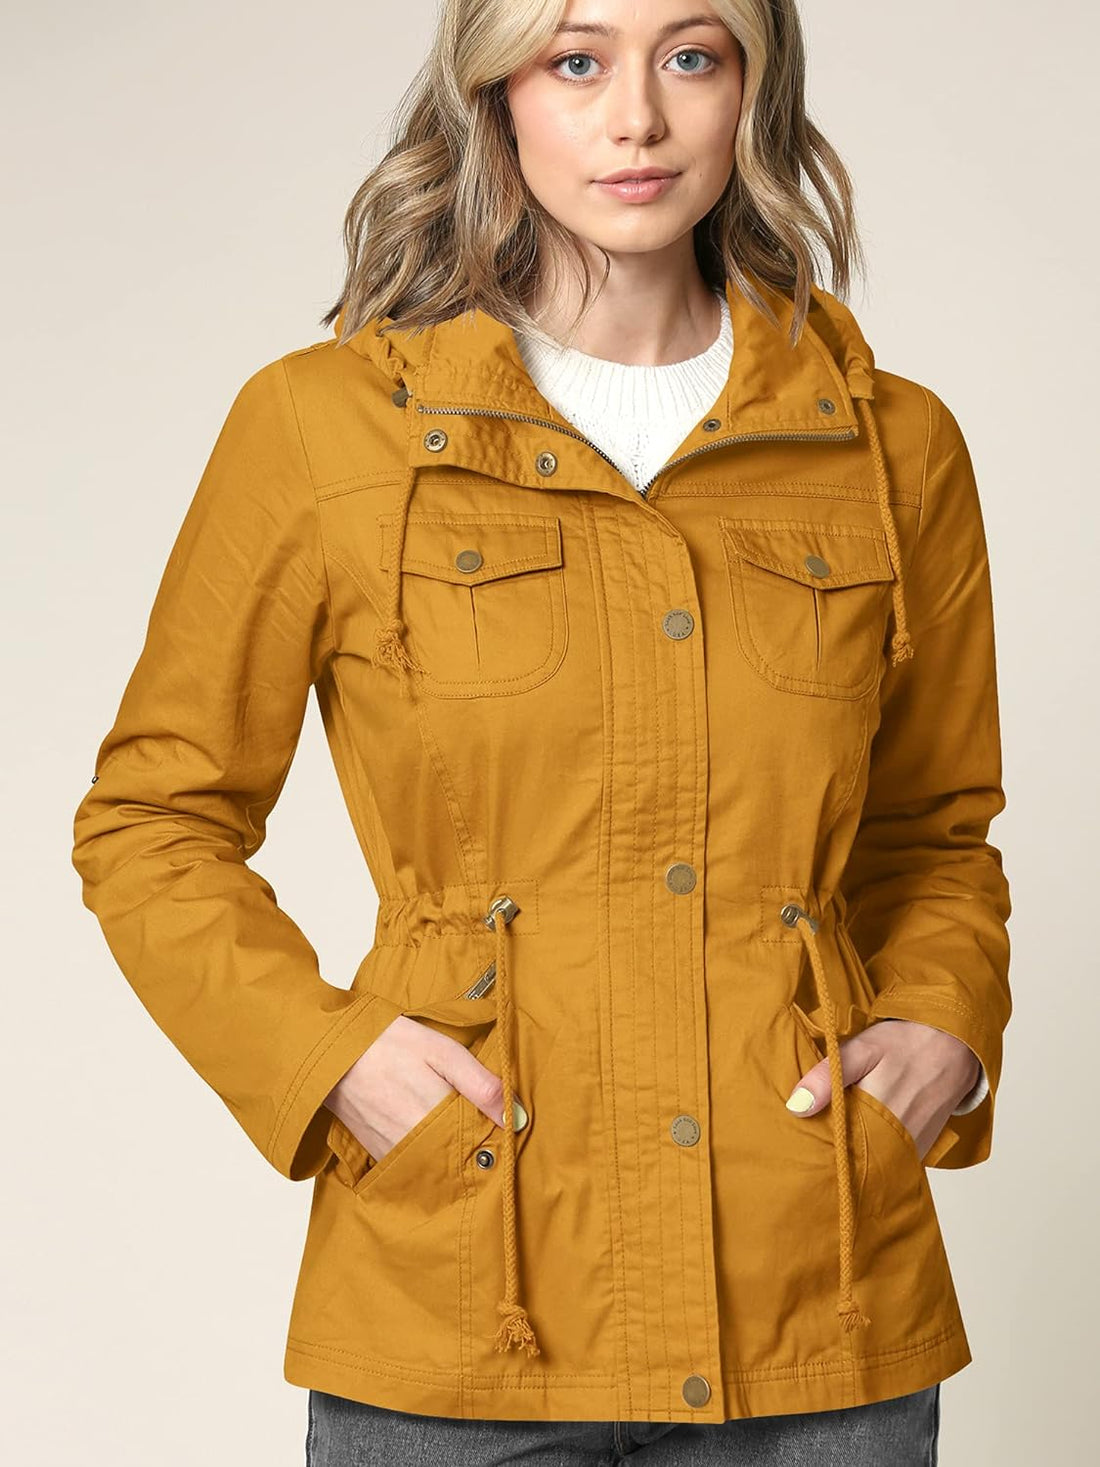 Lock and Love LL Women's Casual Military Safari Anorak Jacket with Hoodie, Wjc643_mustard, XX-Large